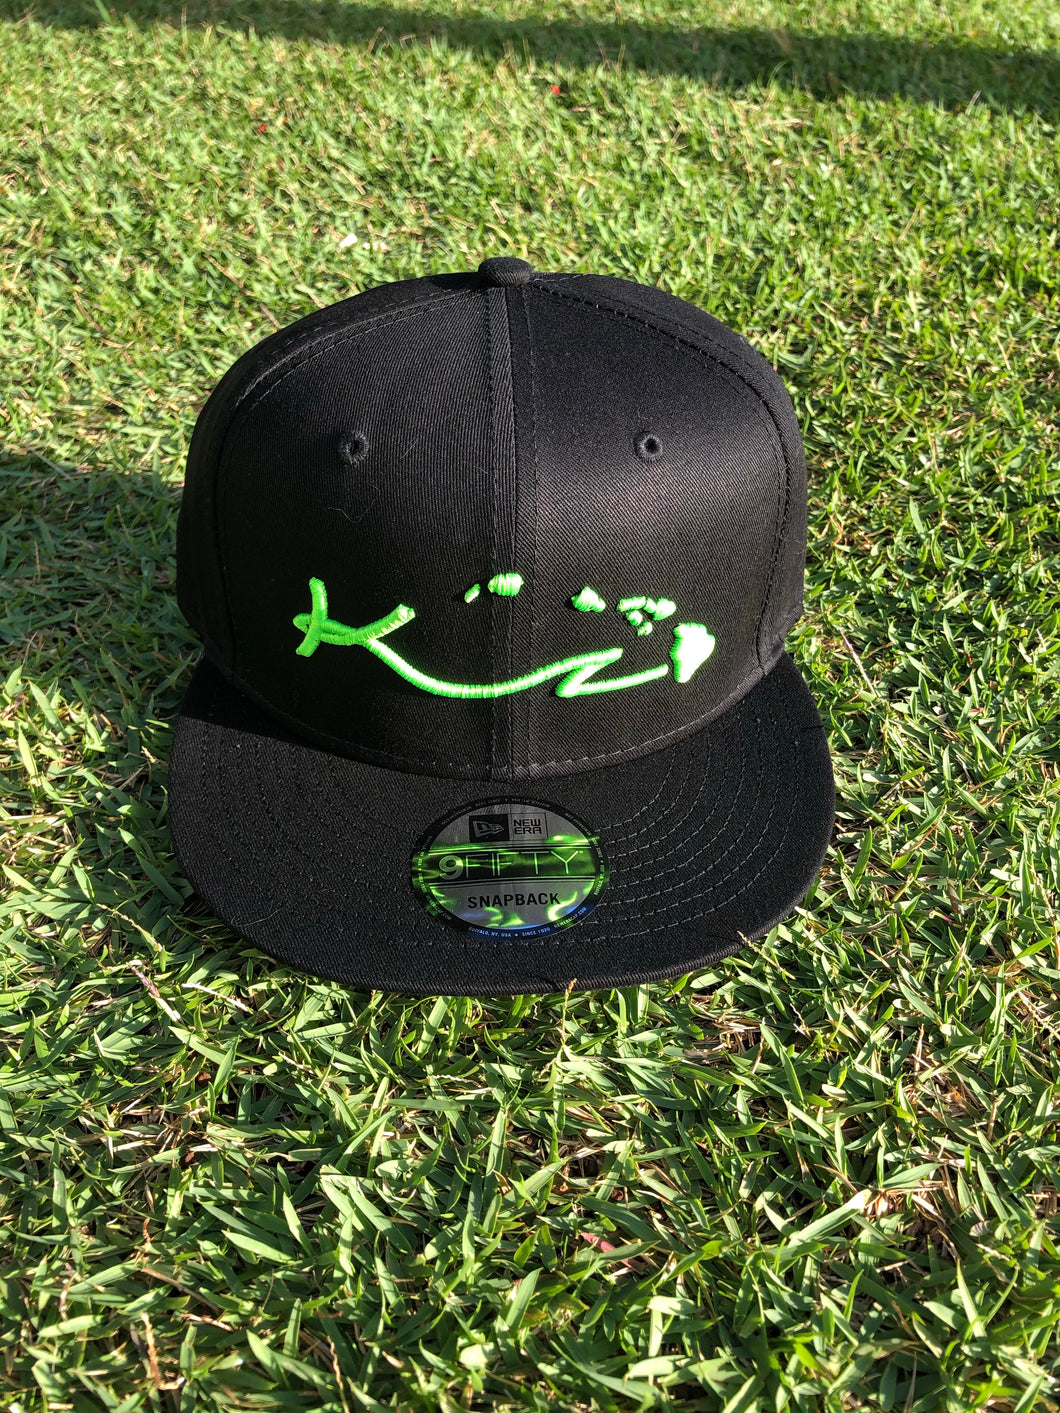 BLACK SNAP BACK HAT WITH FLUORESCENT GREEN LOGO AND ISLANDS